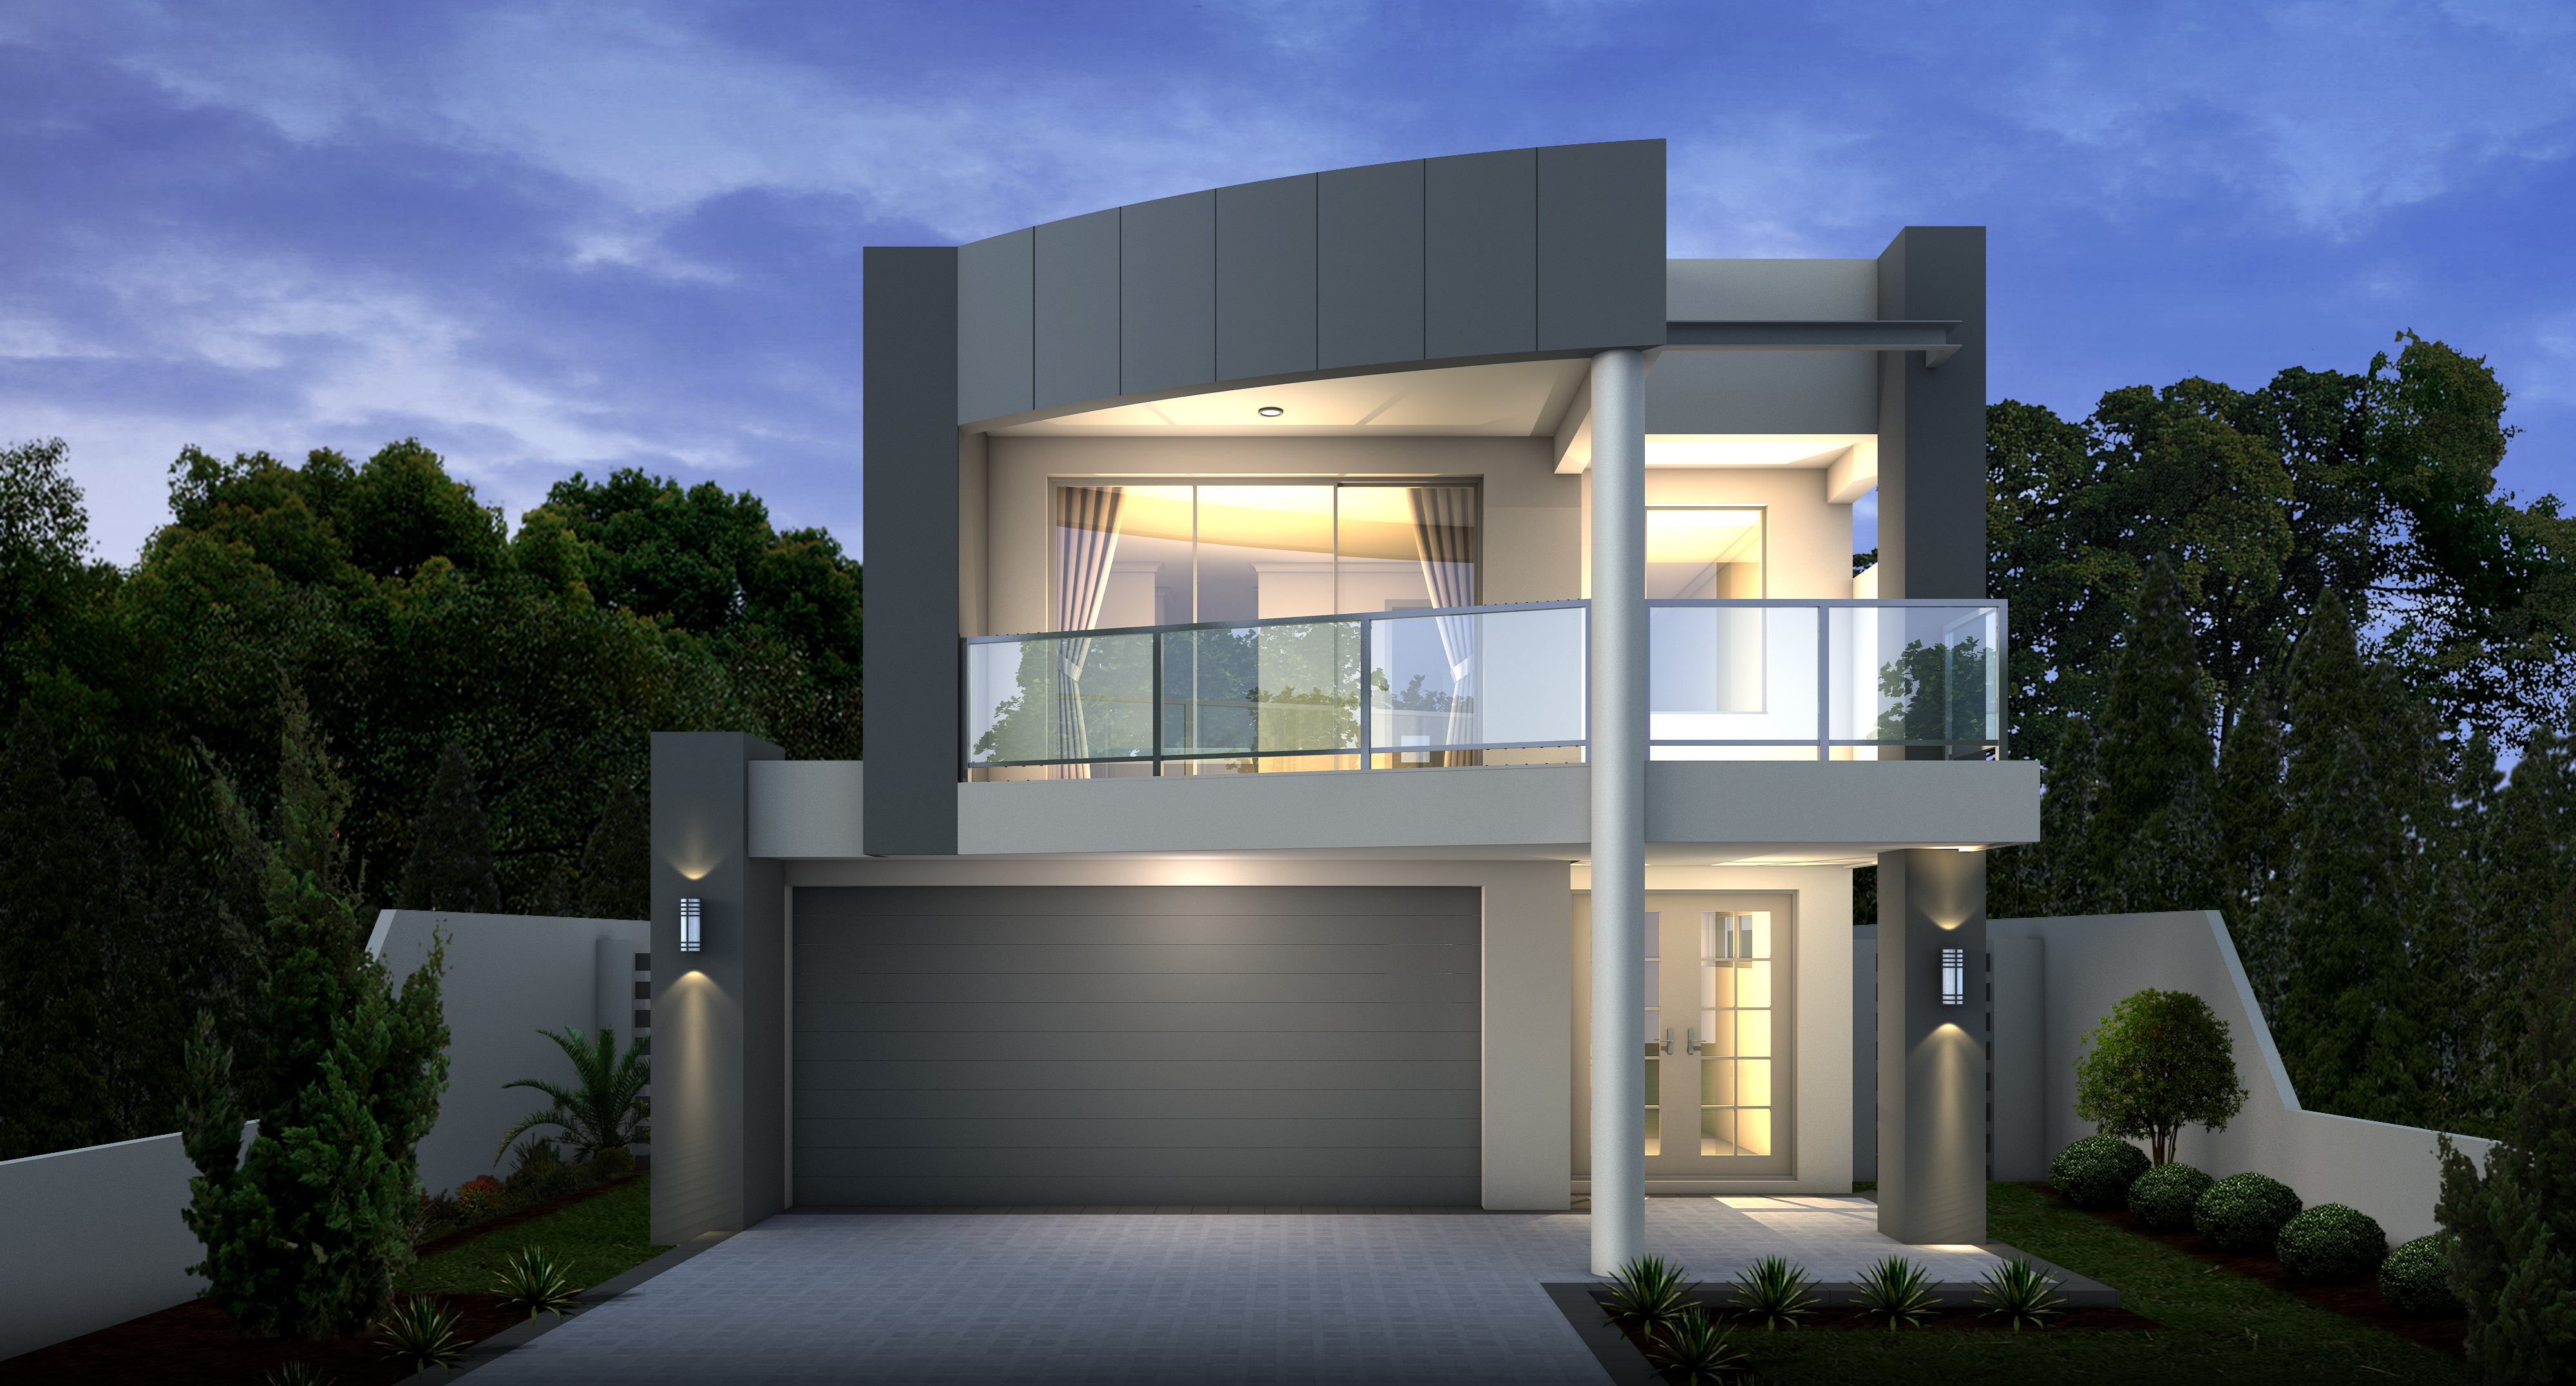 Virage two storey house designs